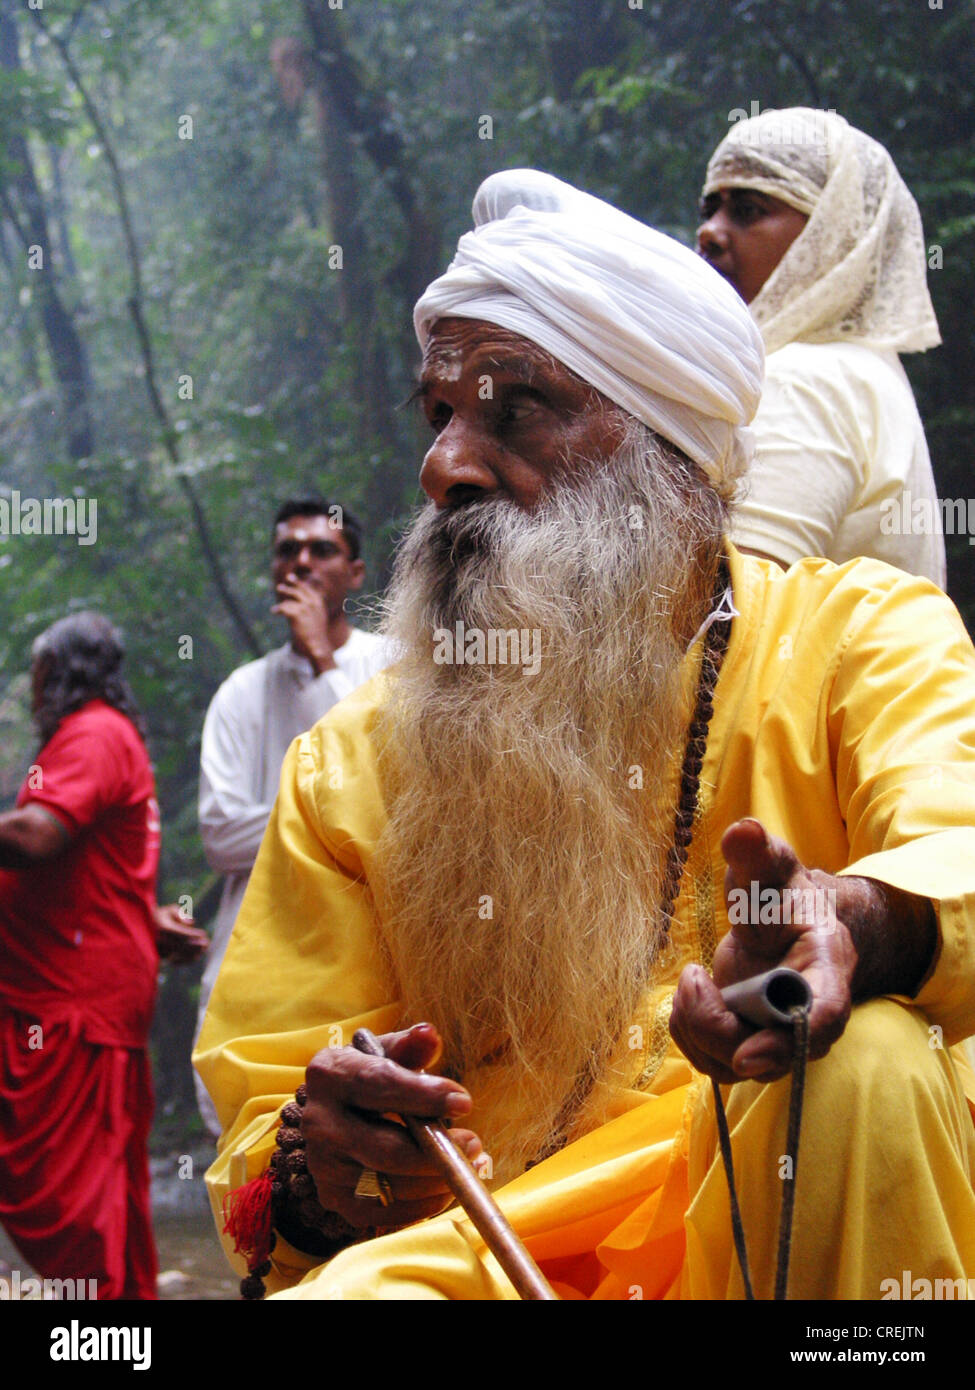 Hindu priests with long white beard in a river ritual in the north of the carribean island Trinidad, Trinidad and Tobago, Trinidad Stock Photo